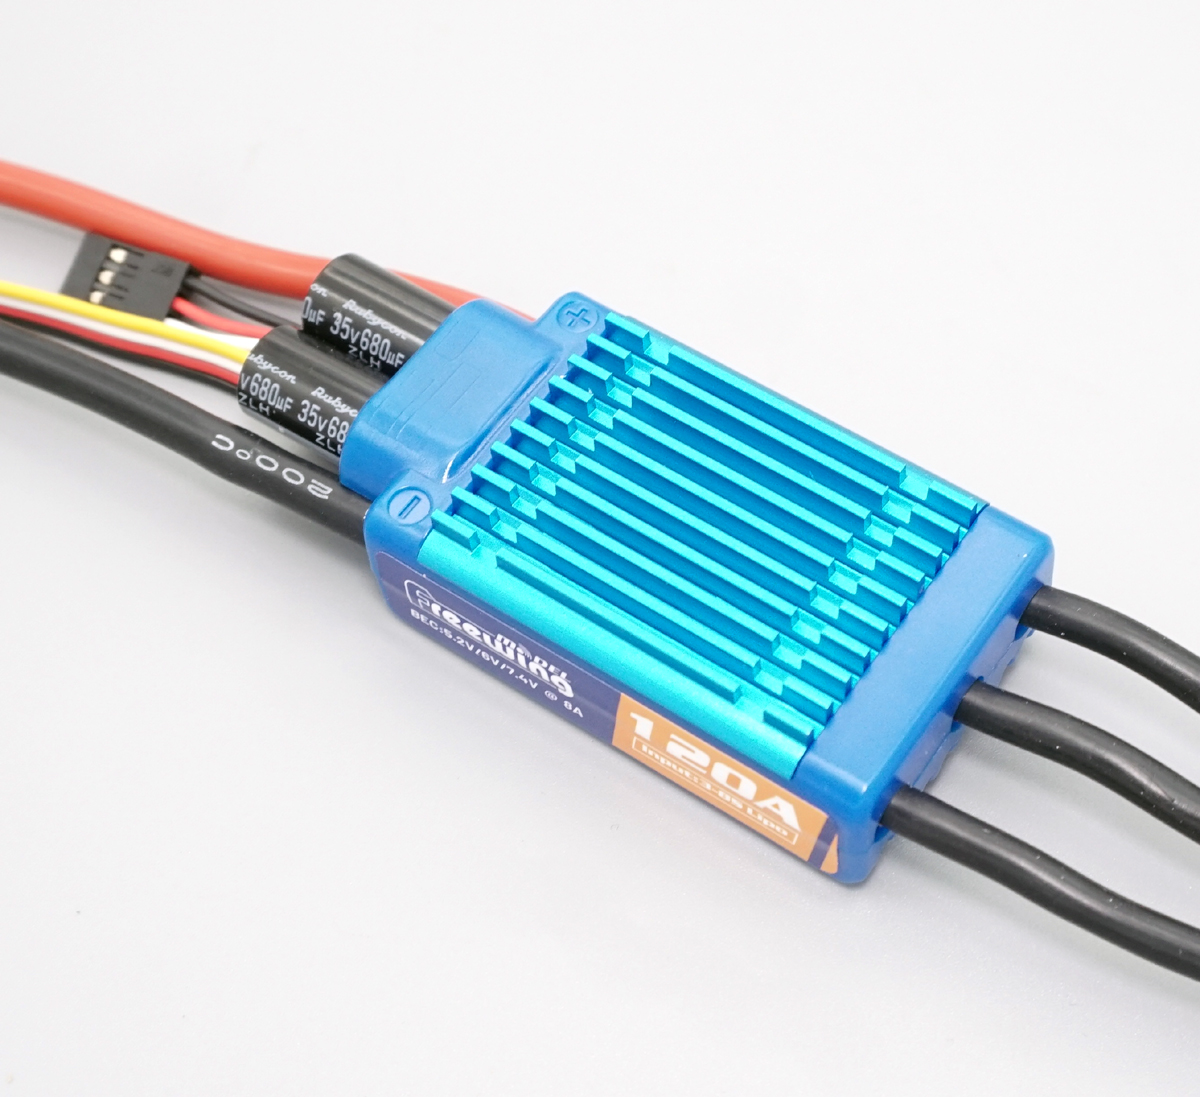  Freewing 120A HV Brushless ESC With 8A UBEC & Reverse Brake Function 